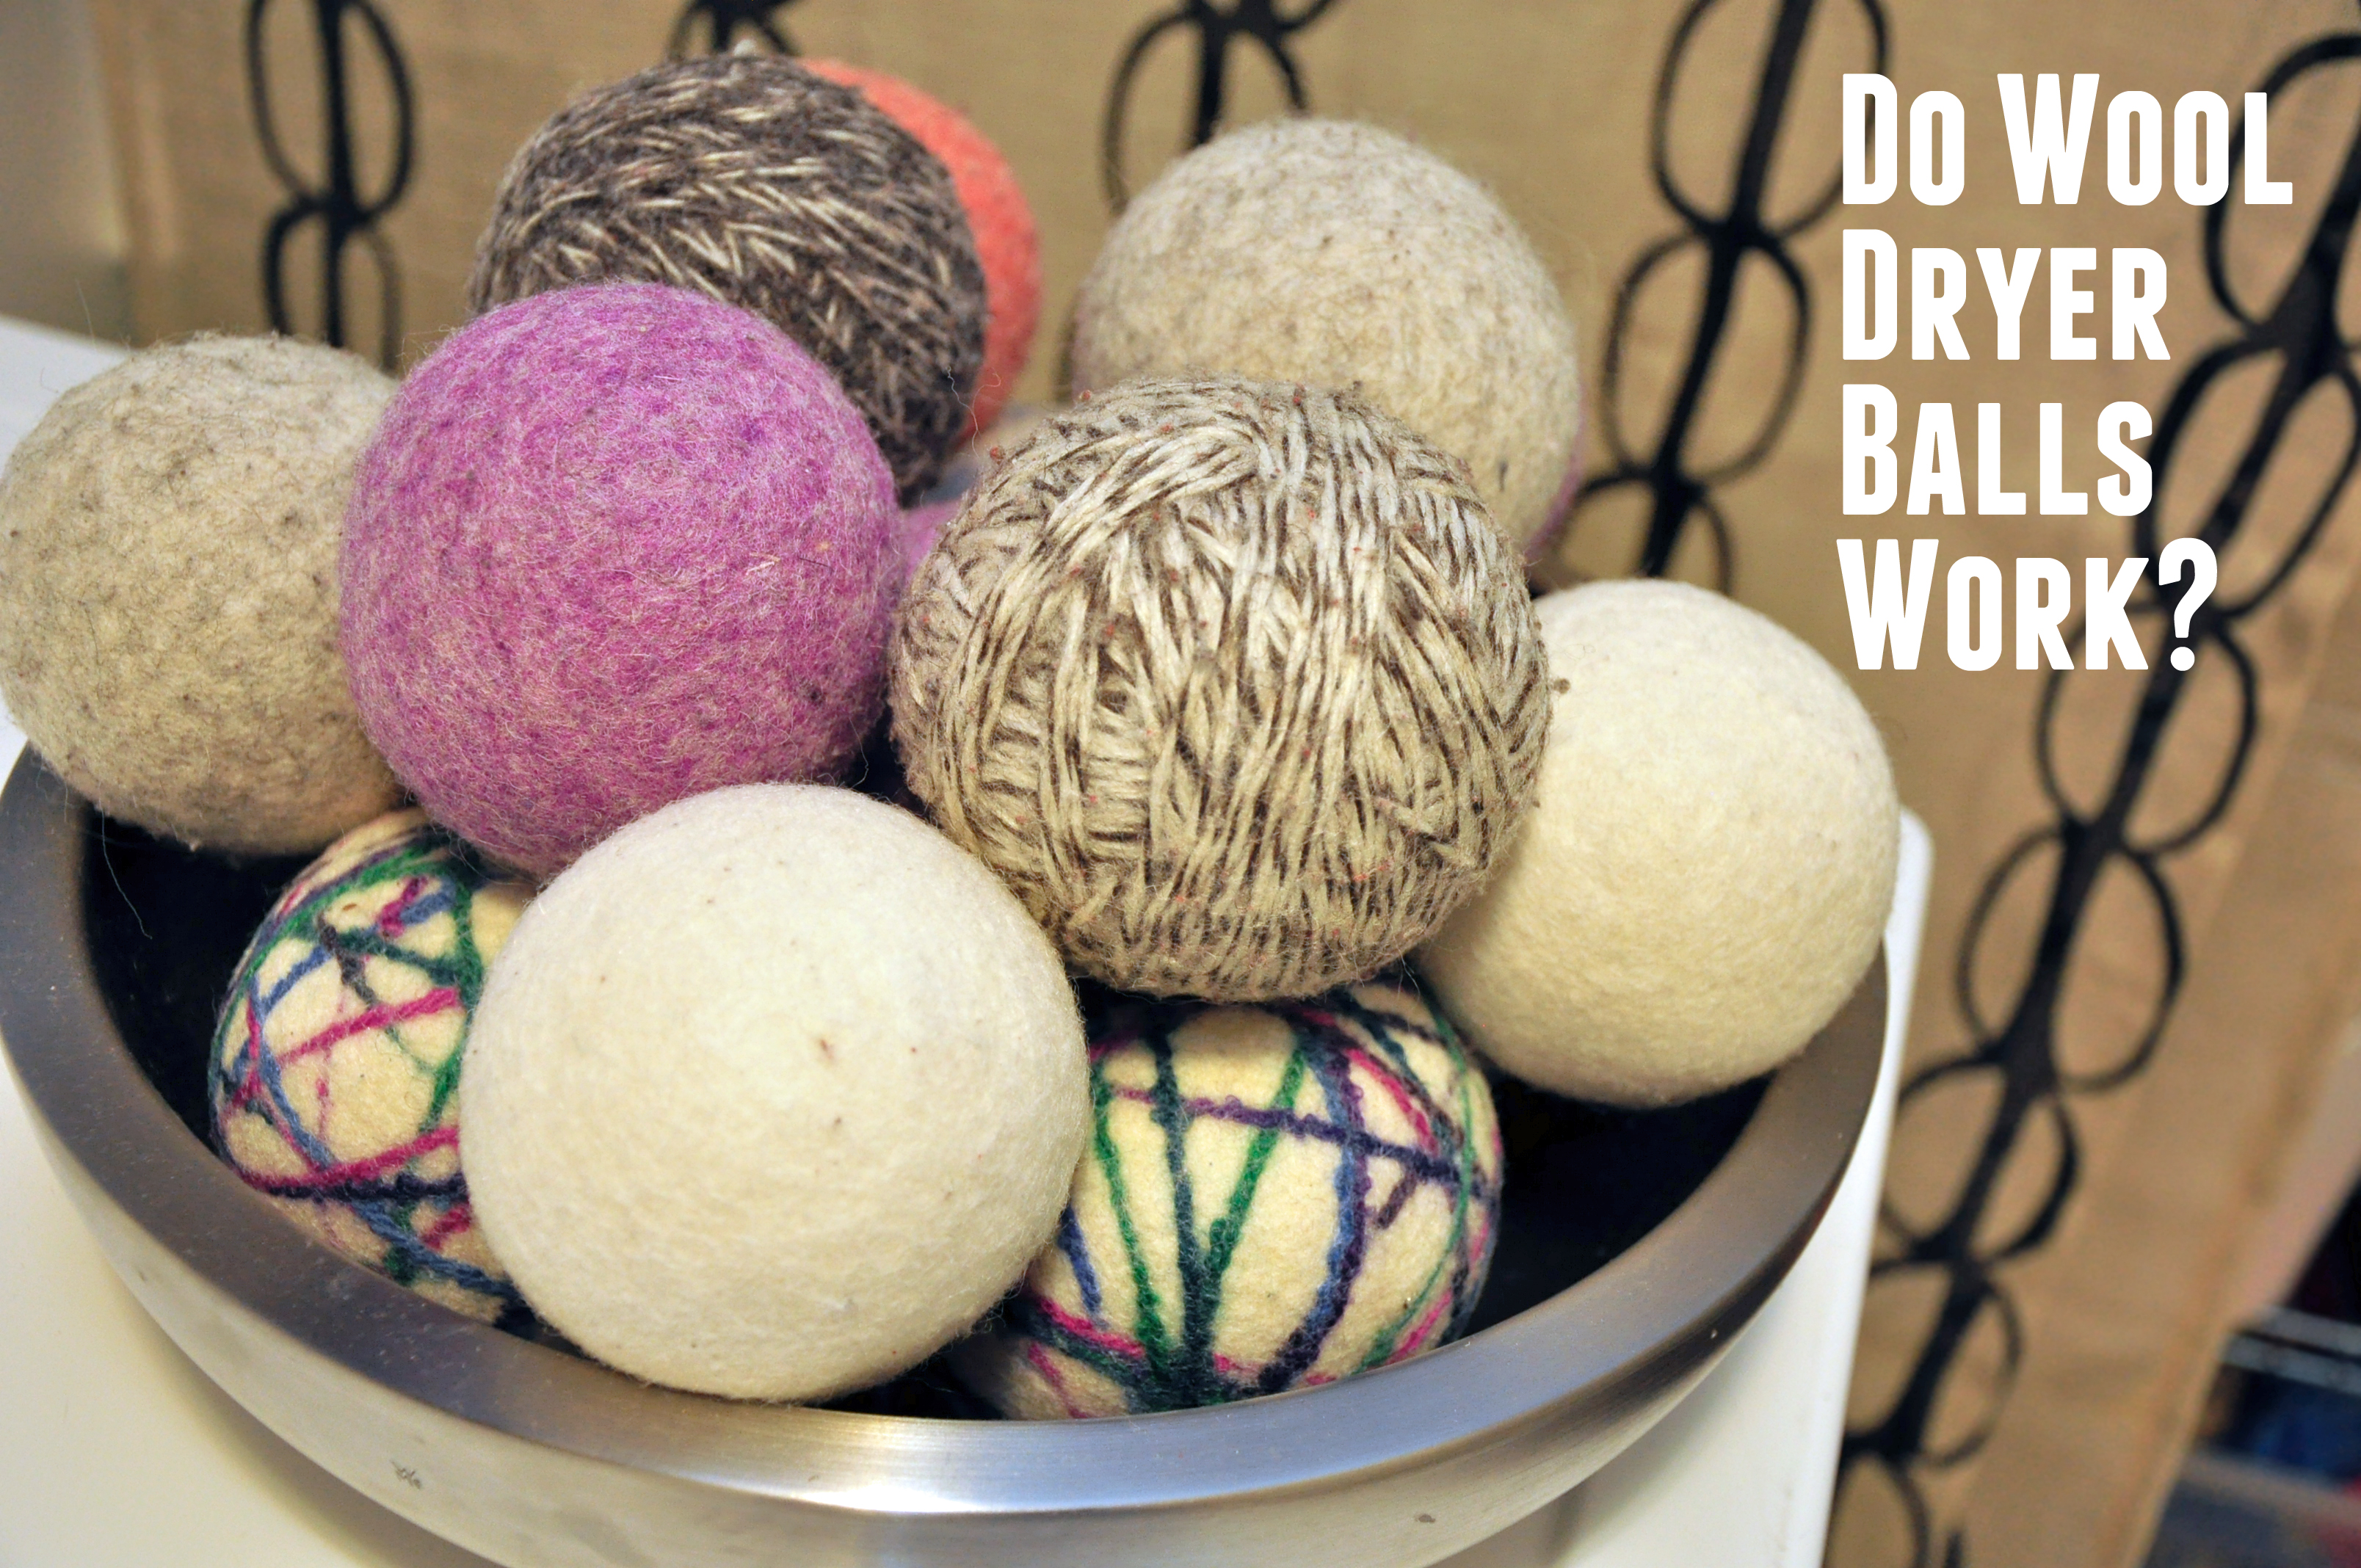 Do wool dryer balls cut down on drying time?